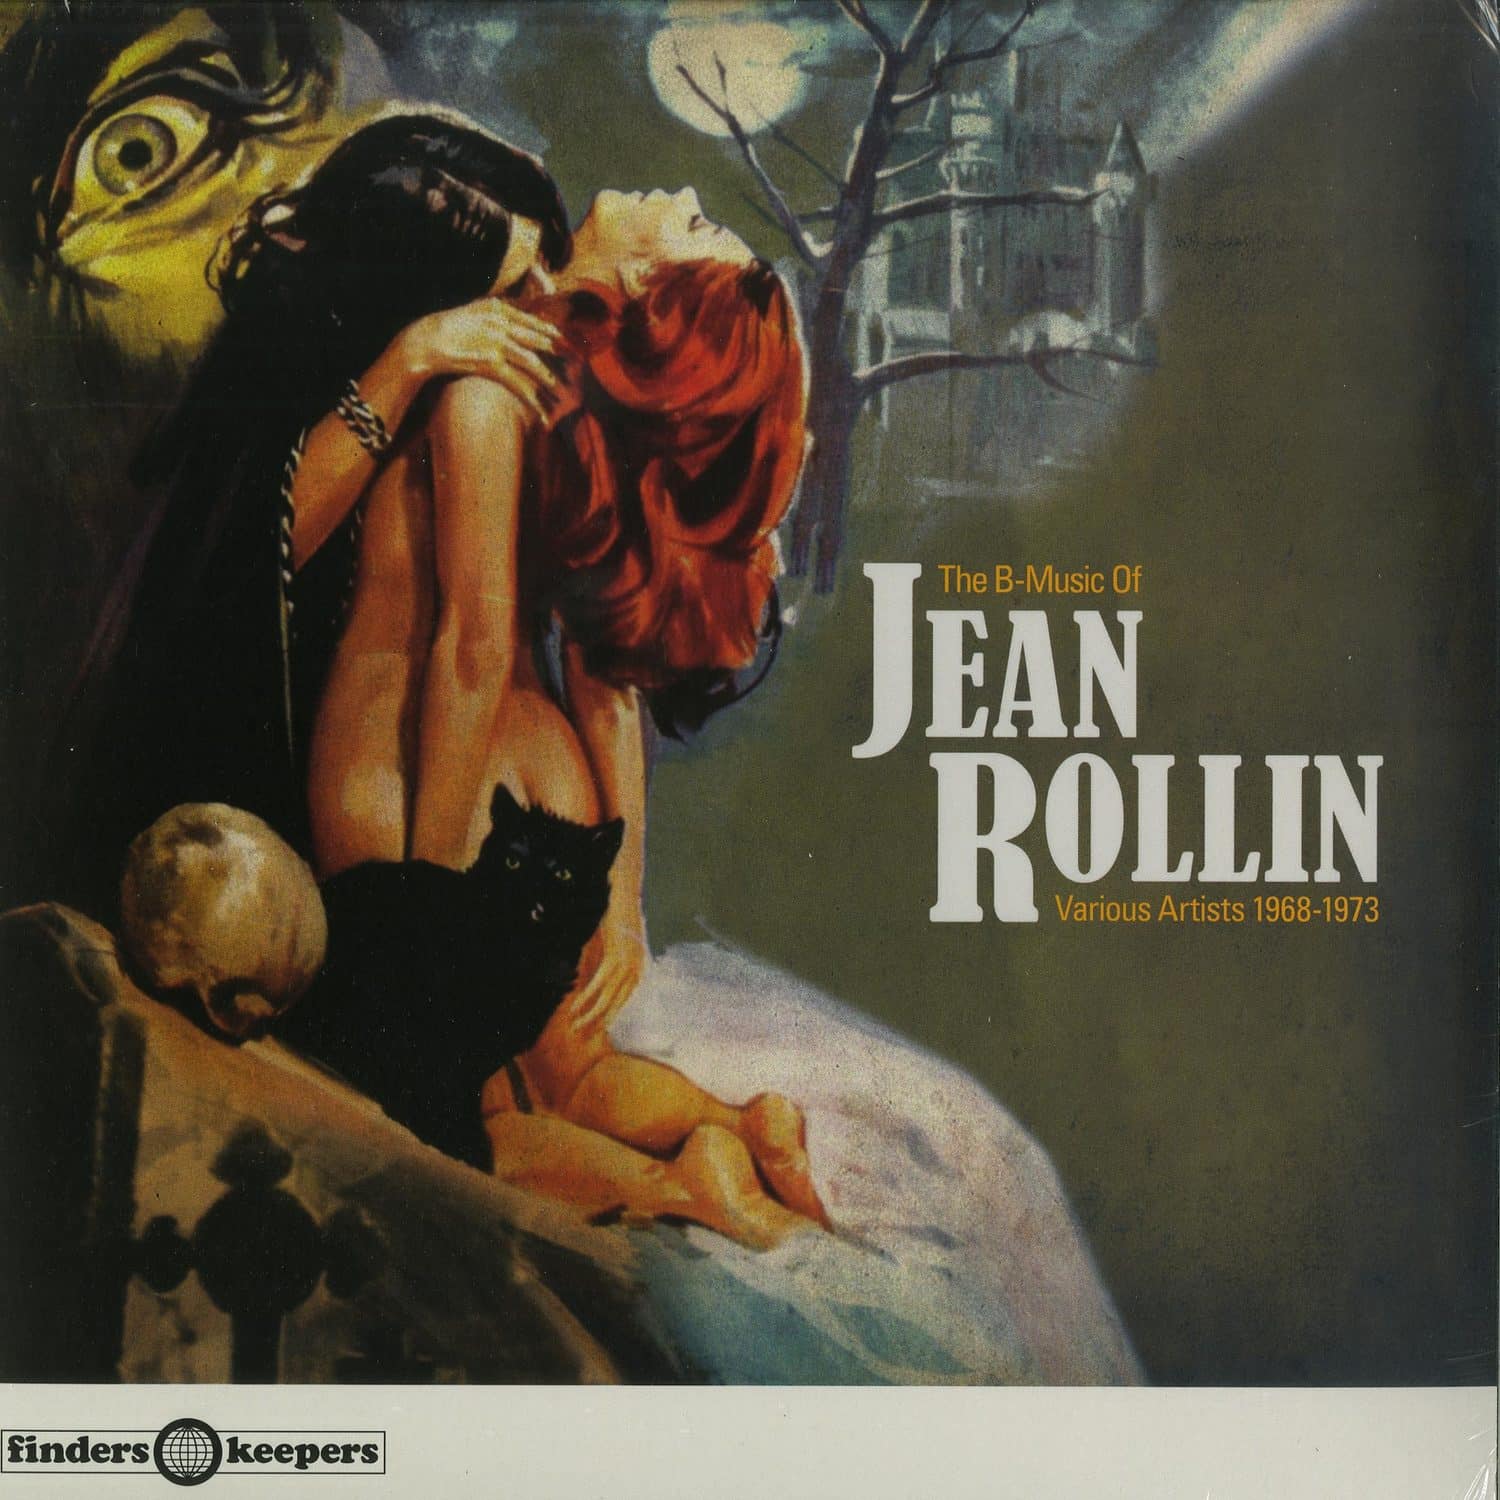 Various Artists - THE B-MUSIC OF JEAN ROLLIN 1968-1973 